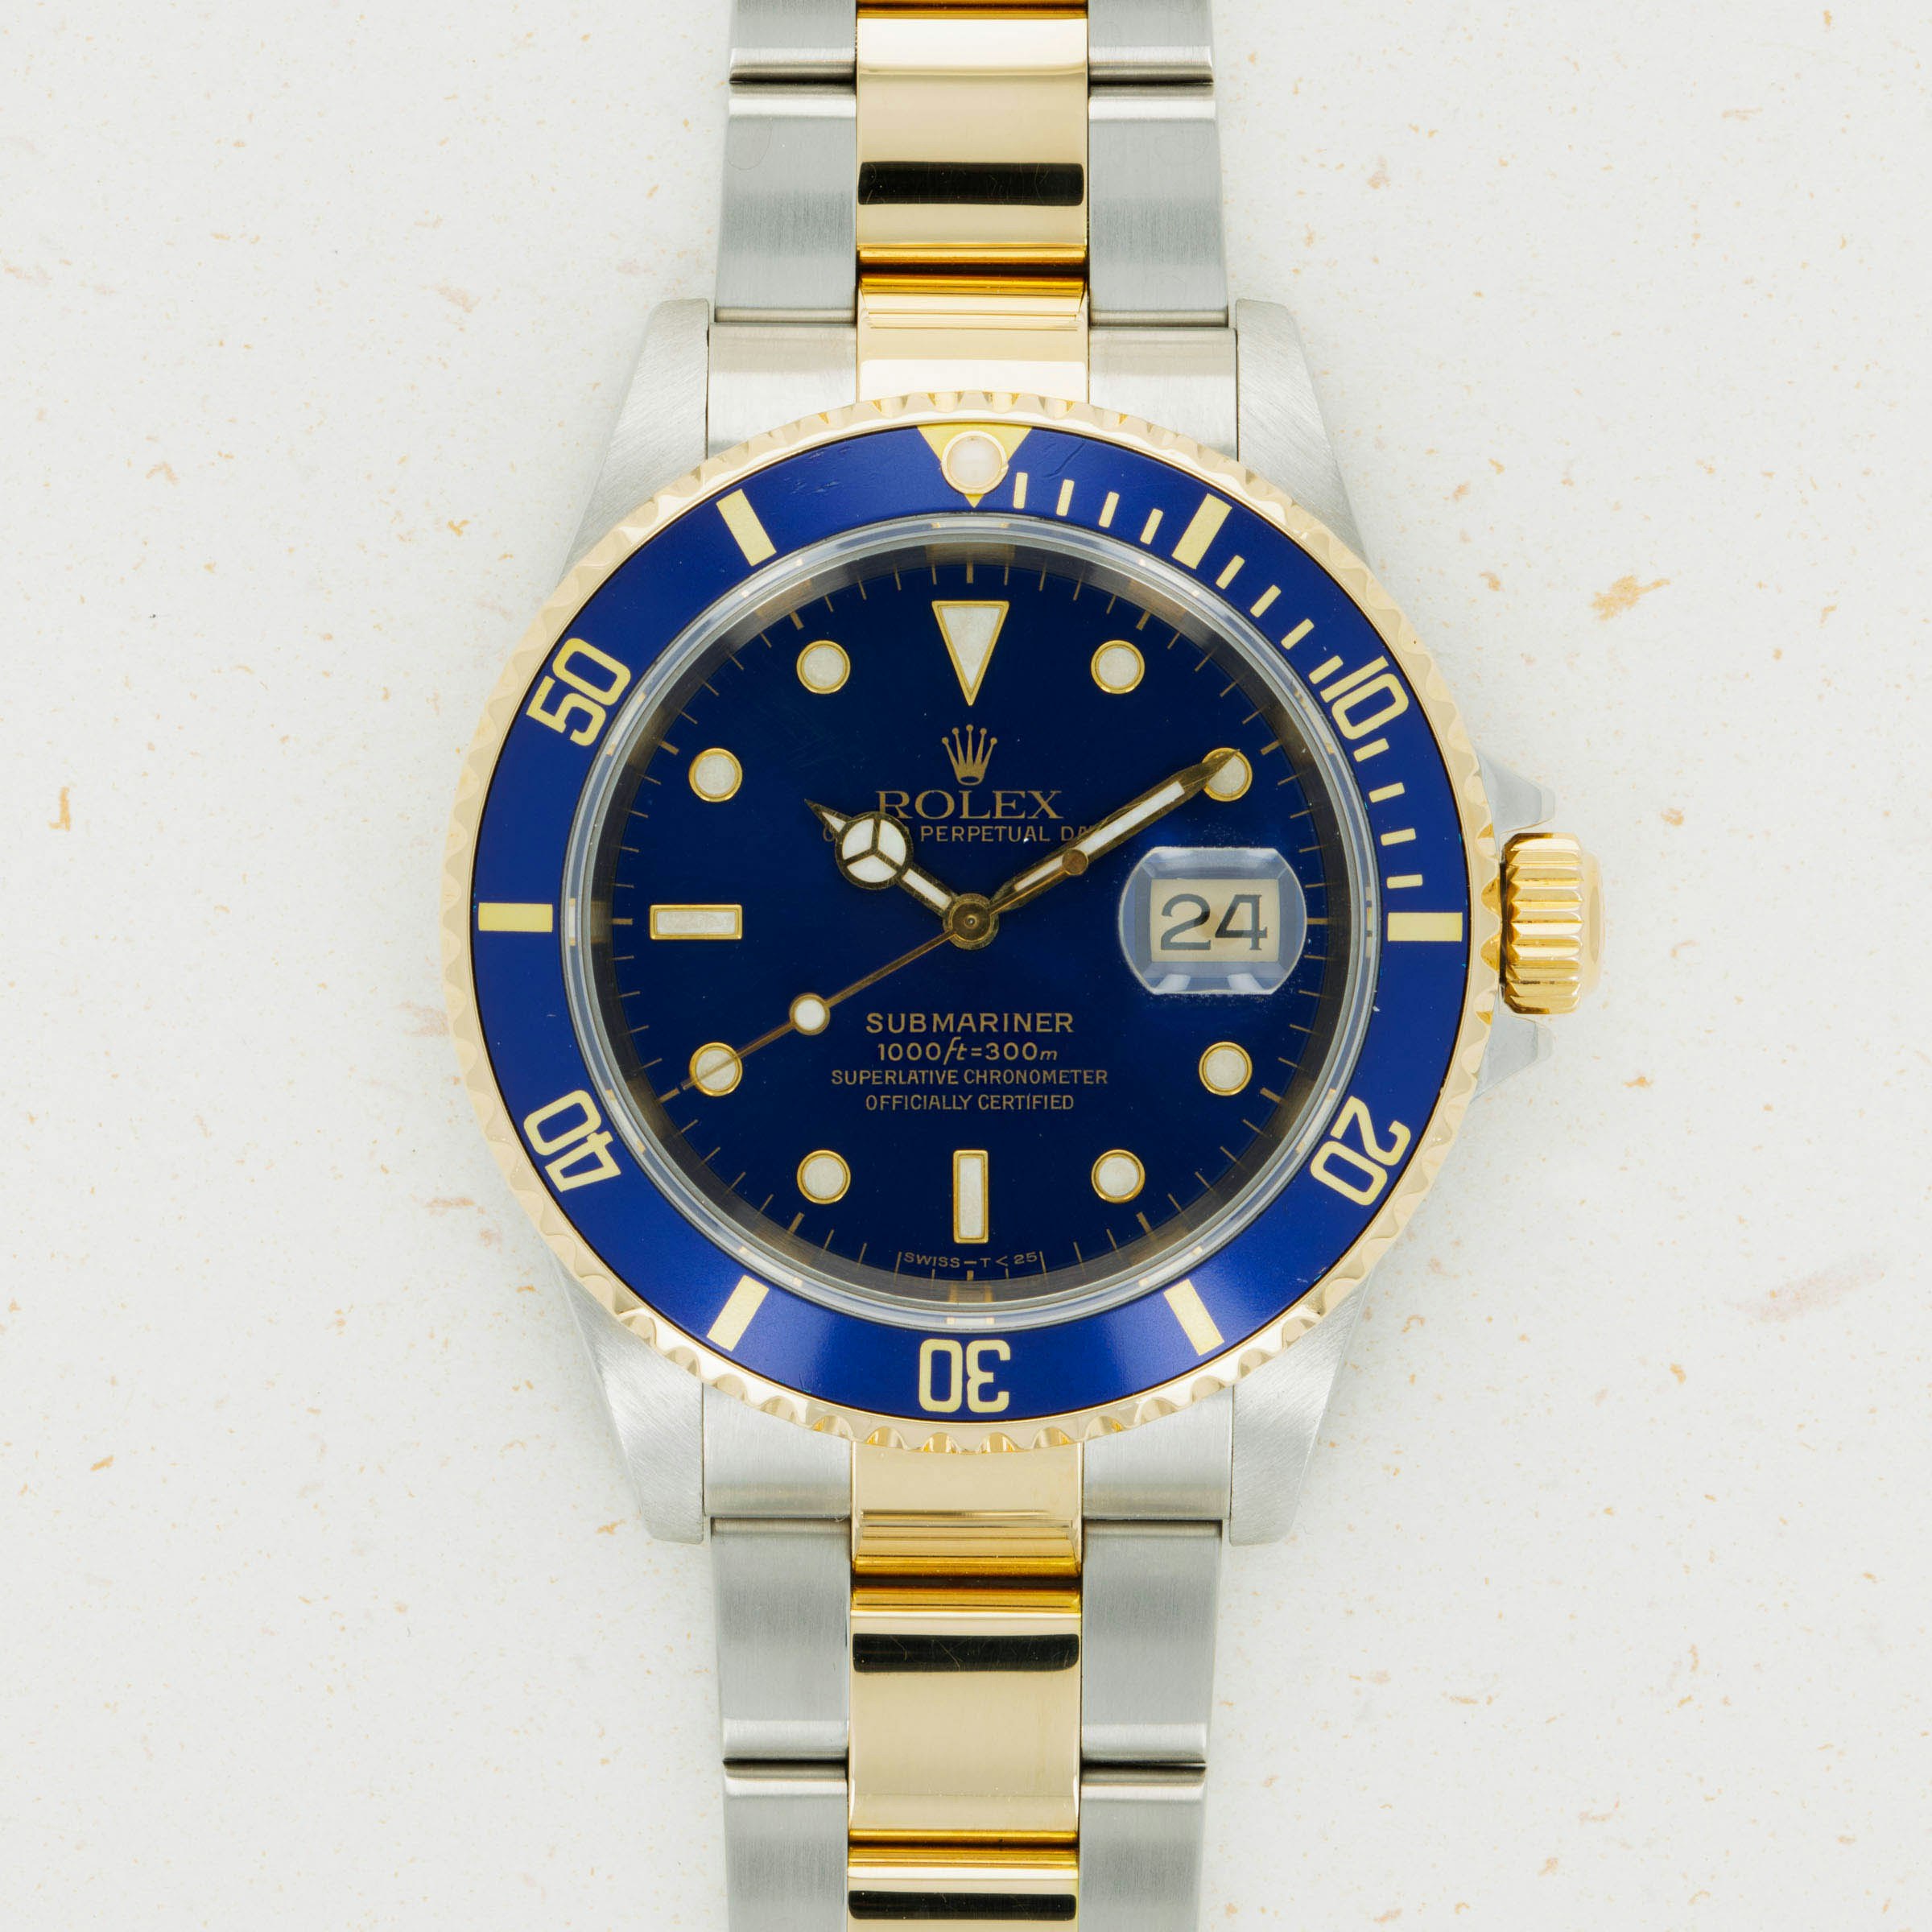 Thumbnail for Rolex Submariner Two-Tone Blue Dial 16613 *AMENDED*